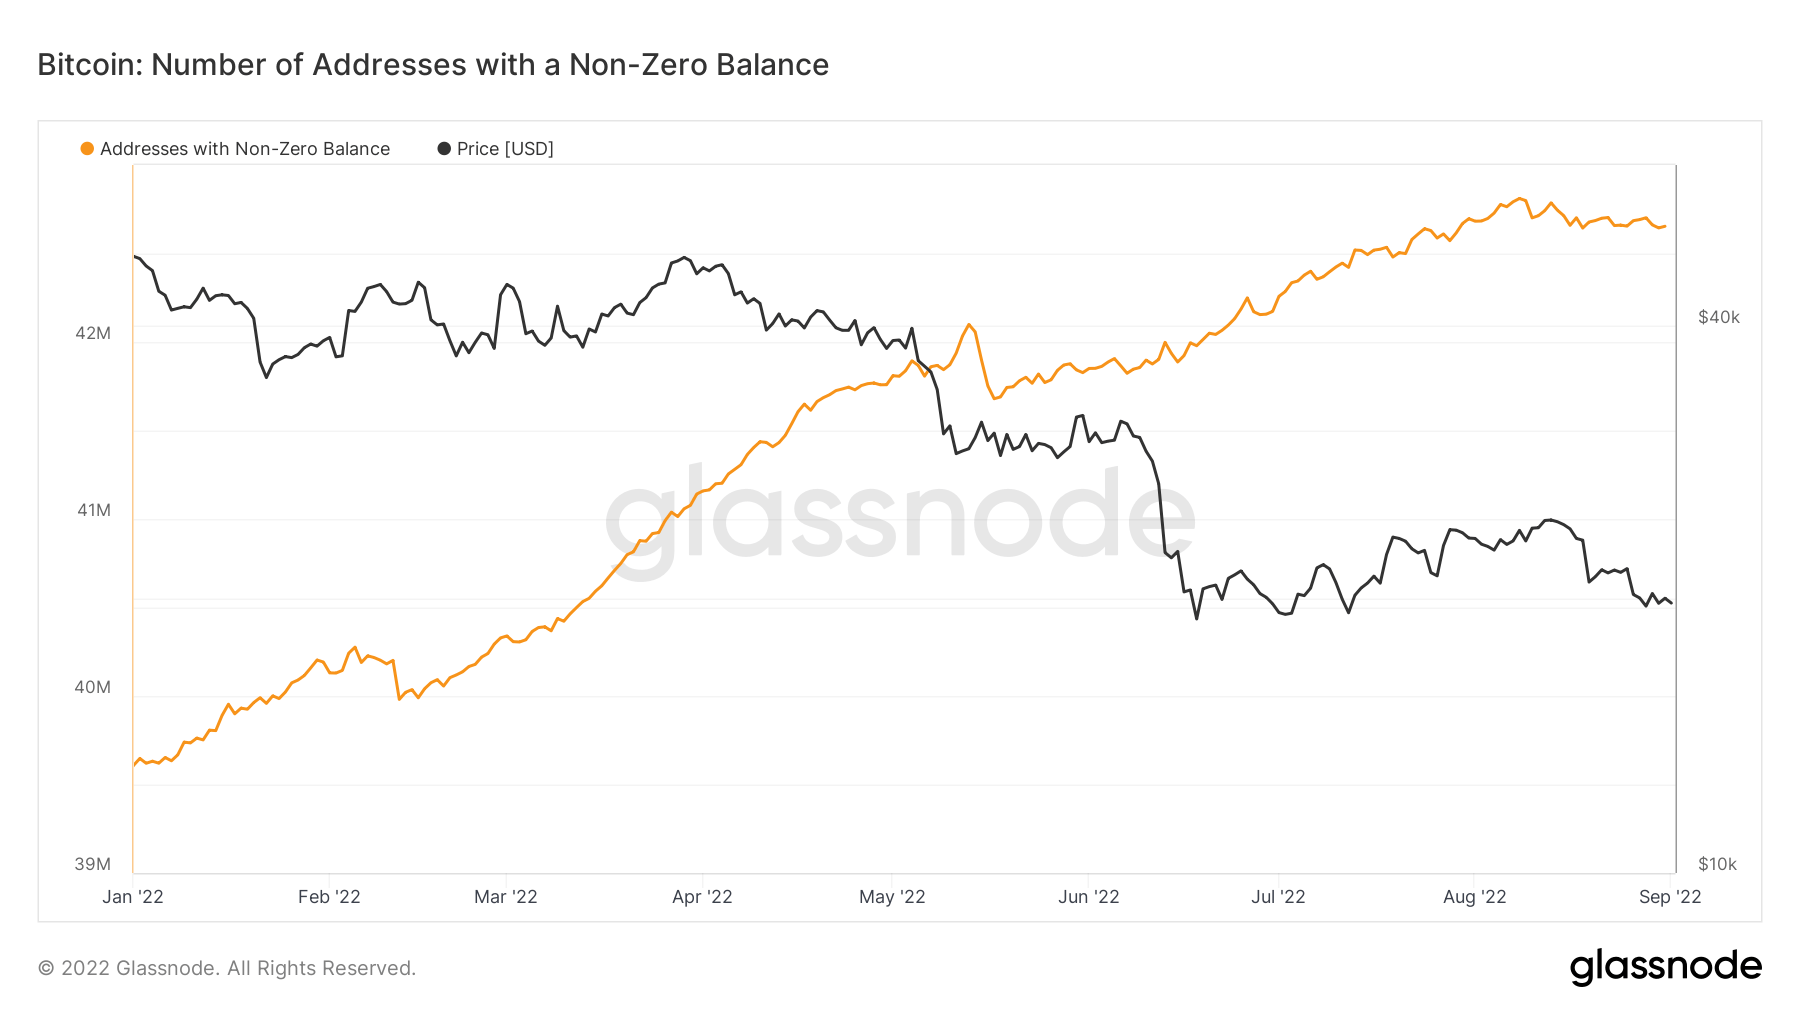 Bitcoin: Number of Addresses with Non-Zero Balance